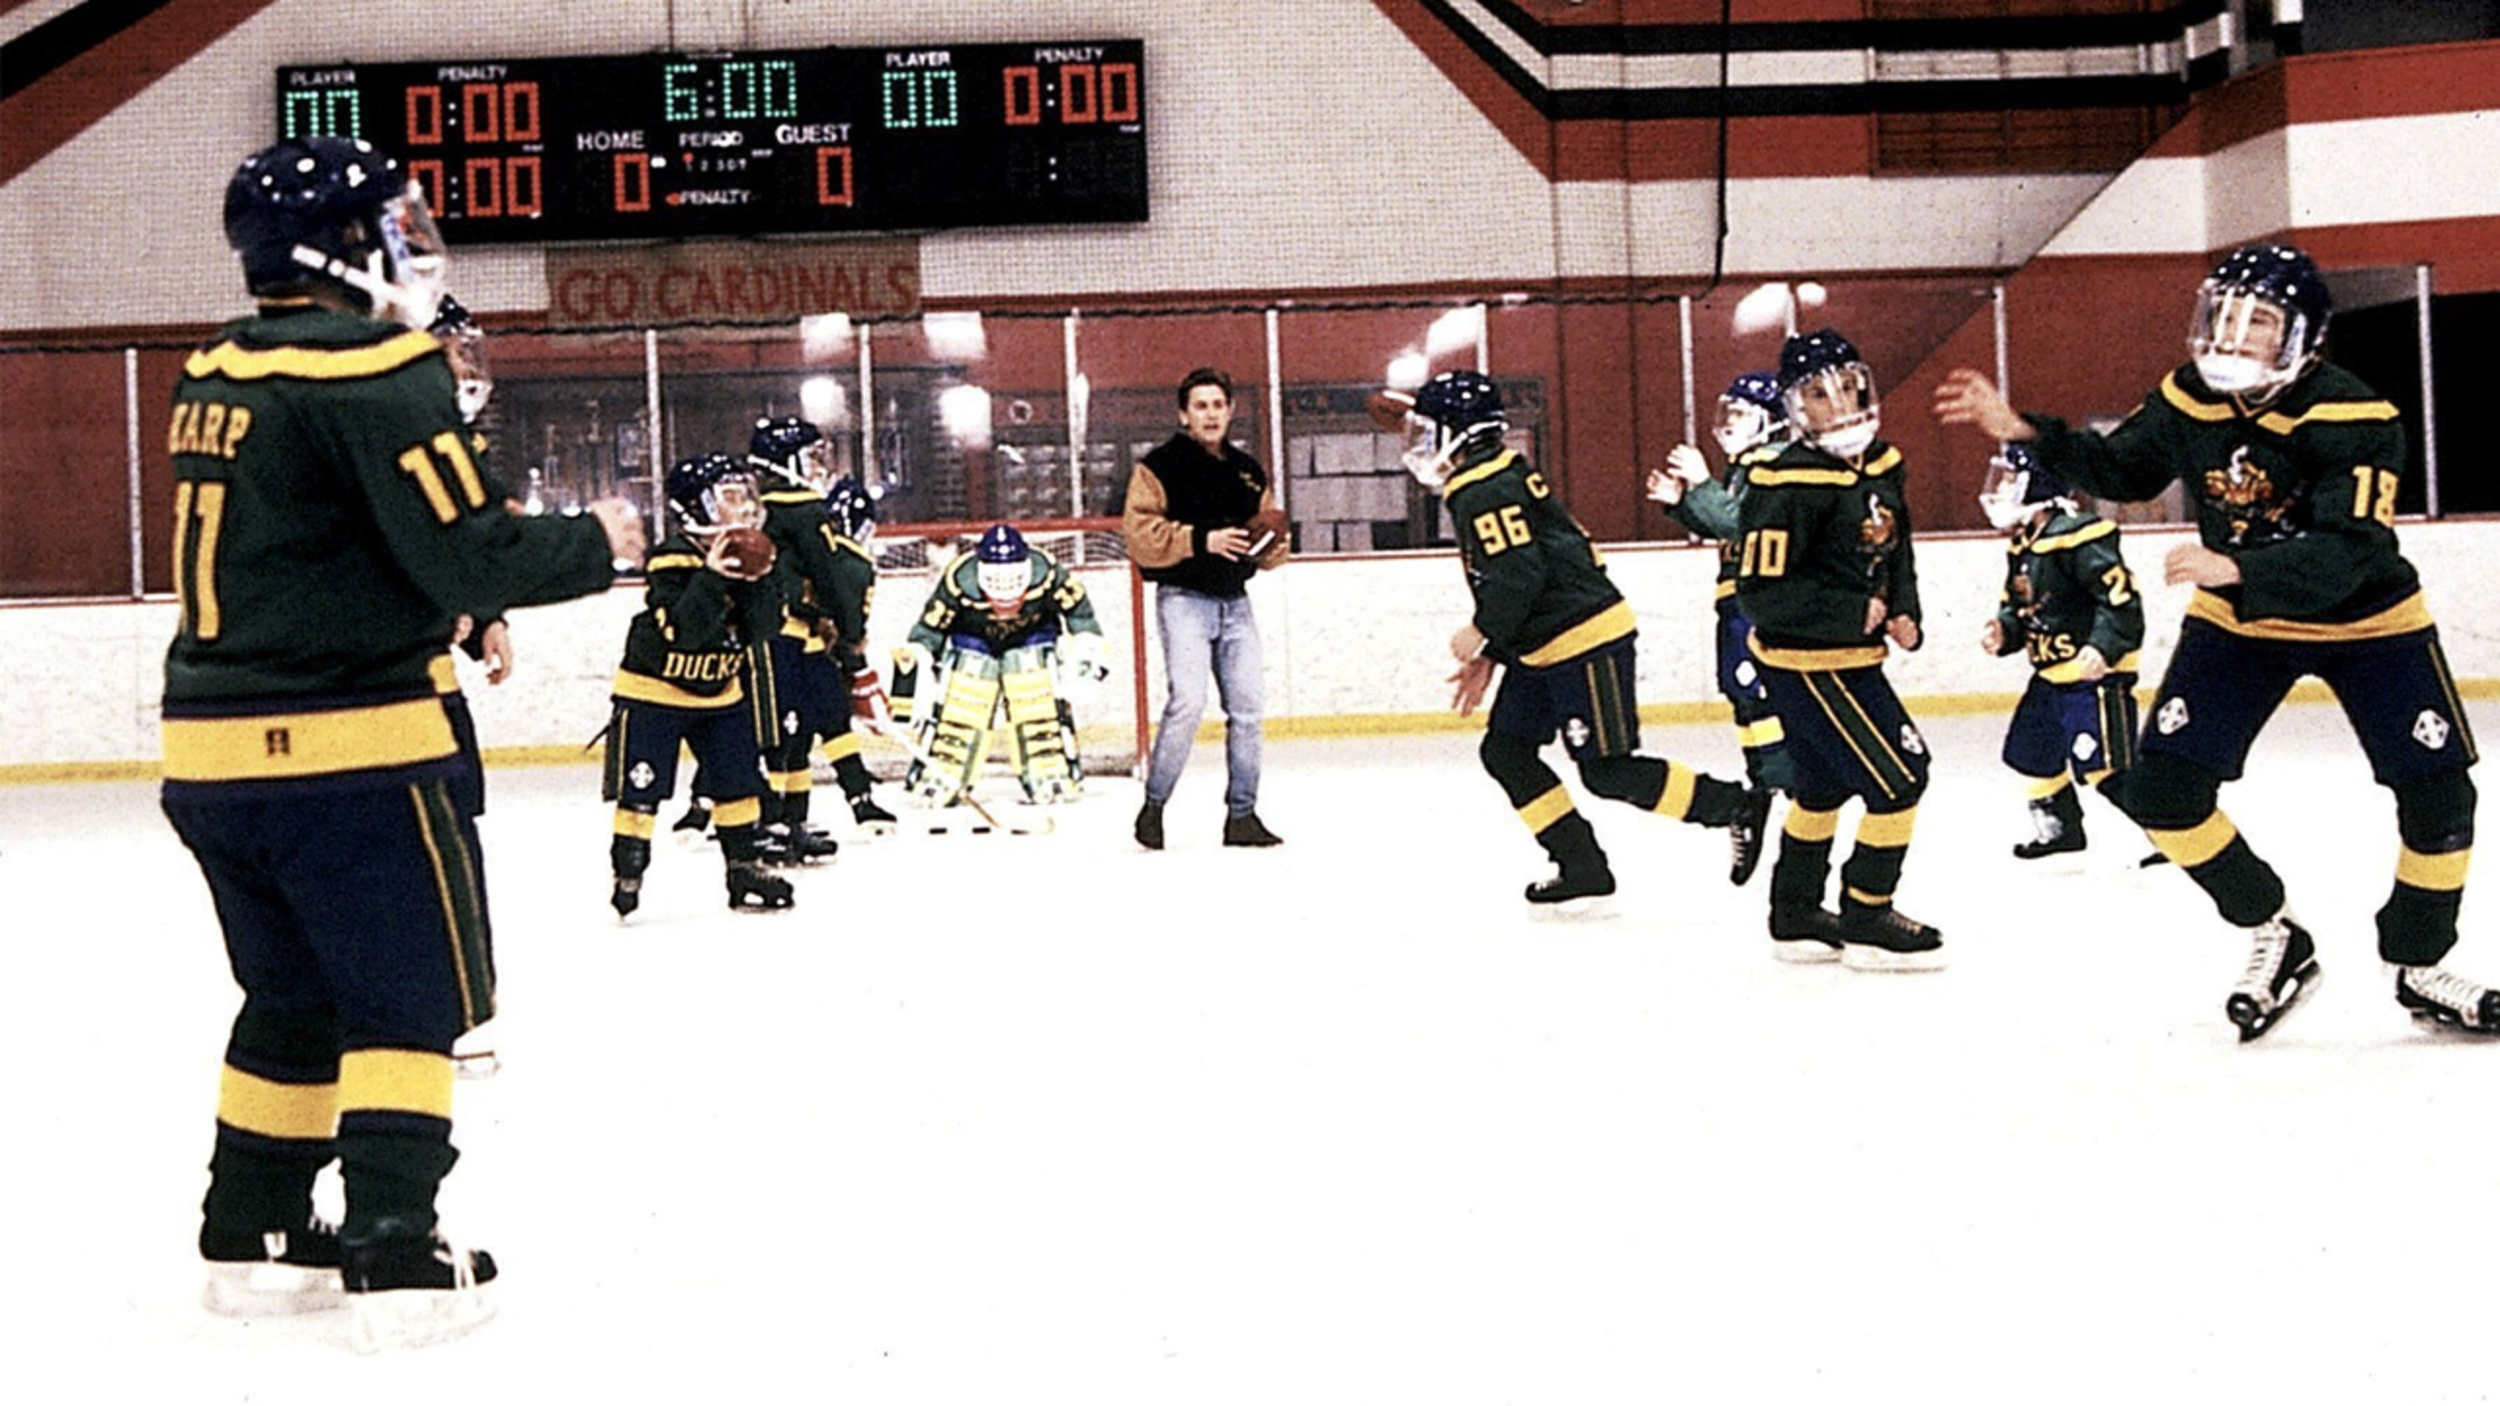 <p>In its way, “D2: The Mighty Ducks” is more fun, mostly because of the knuckle puck and the fact the bad guys are a hockey team from Iceland. However, we couldn’t have that if not for the first movie in the eventual trilogy. The stakes are lower here. Gordon Bombay is just a disgraced lawyer coaching a lousy kids hockey team in Minnesota as community service. Then, he turns the team around and, shockingly, learns a little something in the process.</p><p><a href='https://www.msn.com/en-us/community/channel/vid-cj9pqbr0vn9in2b6ddcd8sfgpfq6x6utp44fssrv6mc2gtybw0us'>Follow us on MSN to see more of our exclusive entertainment content.</a></p>